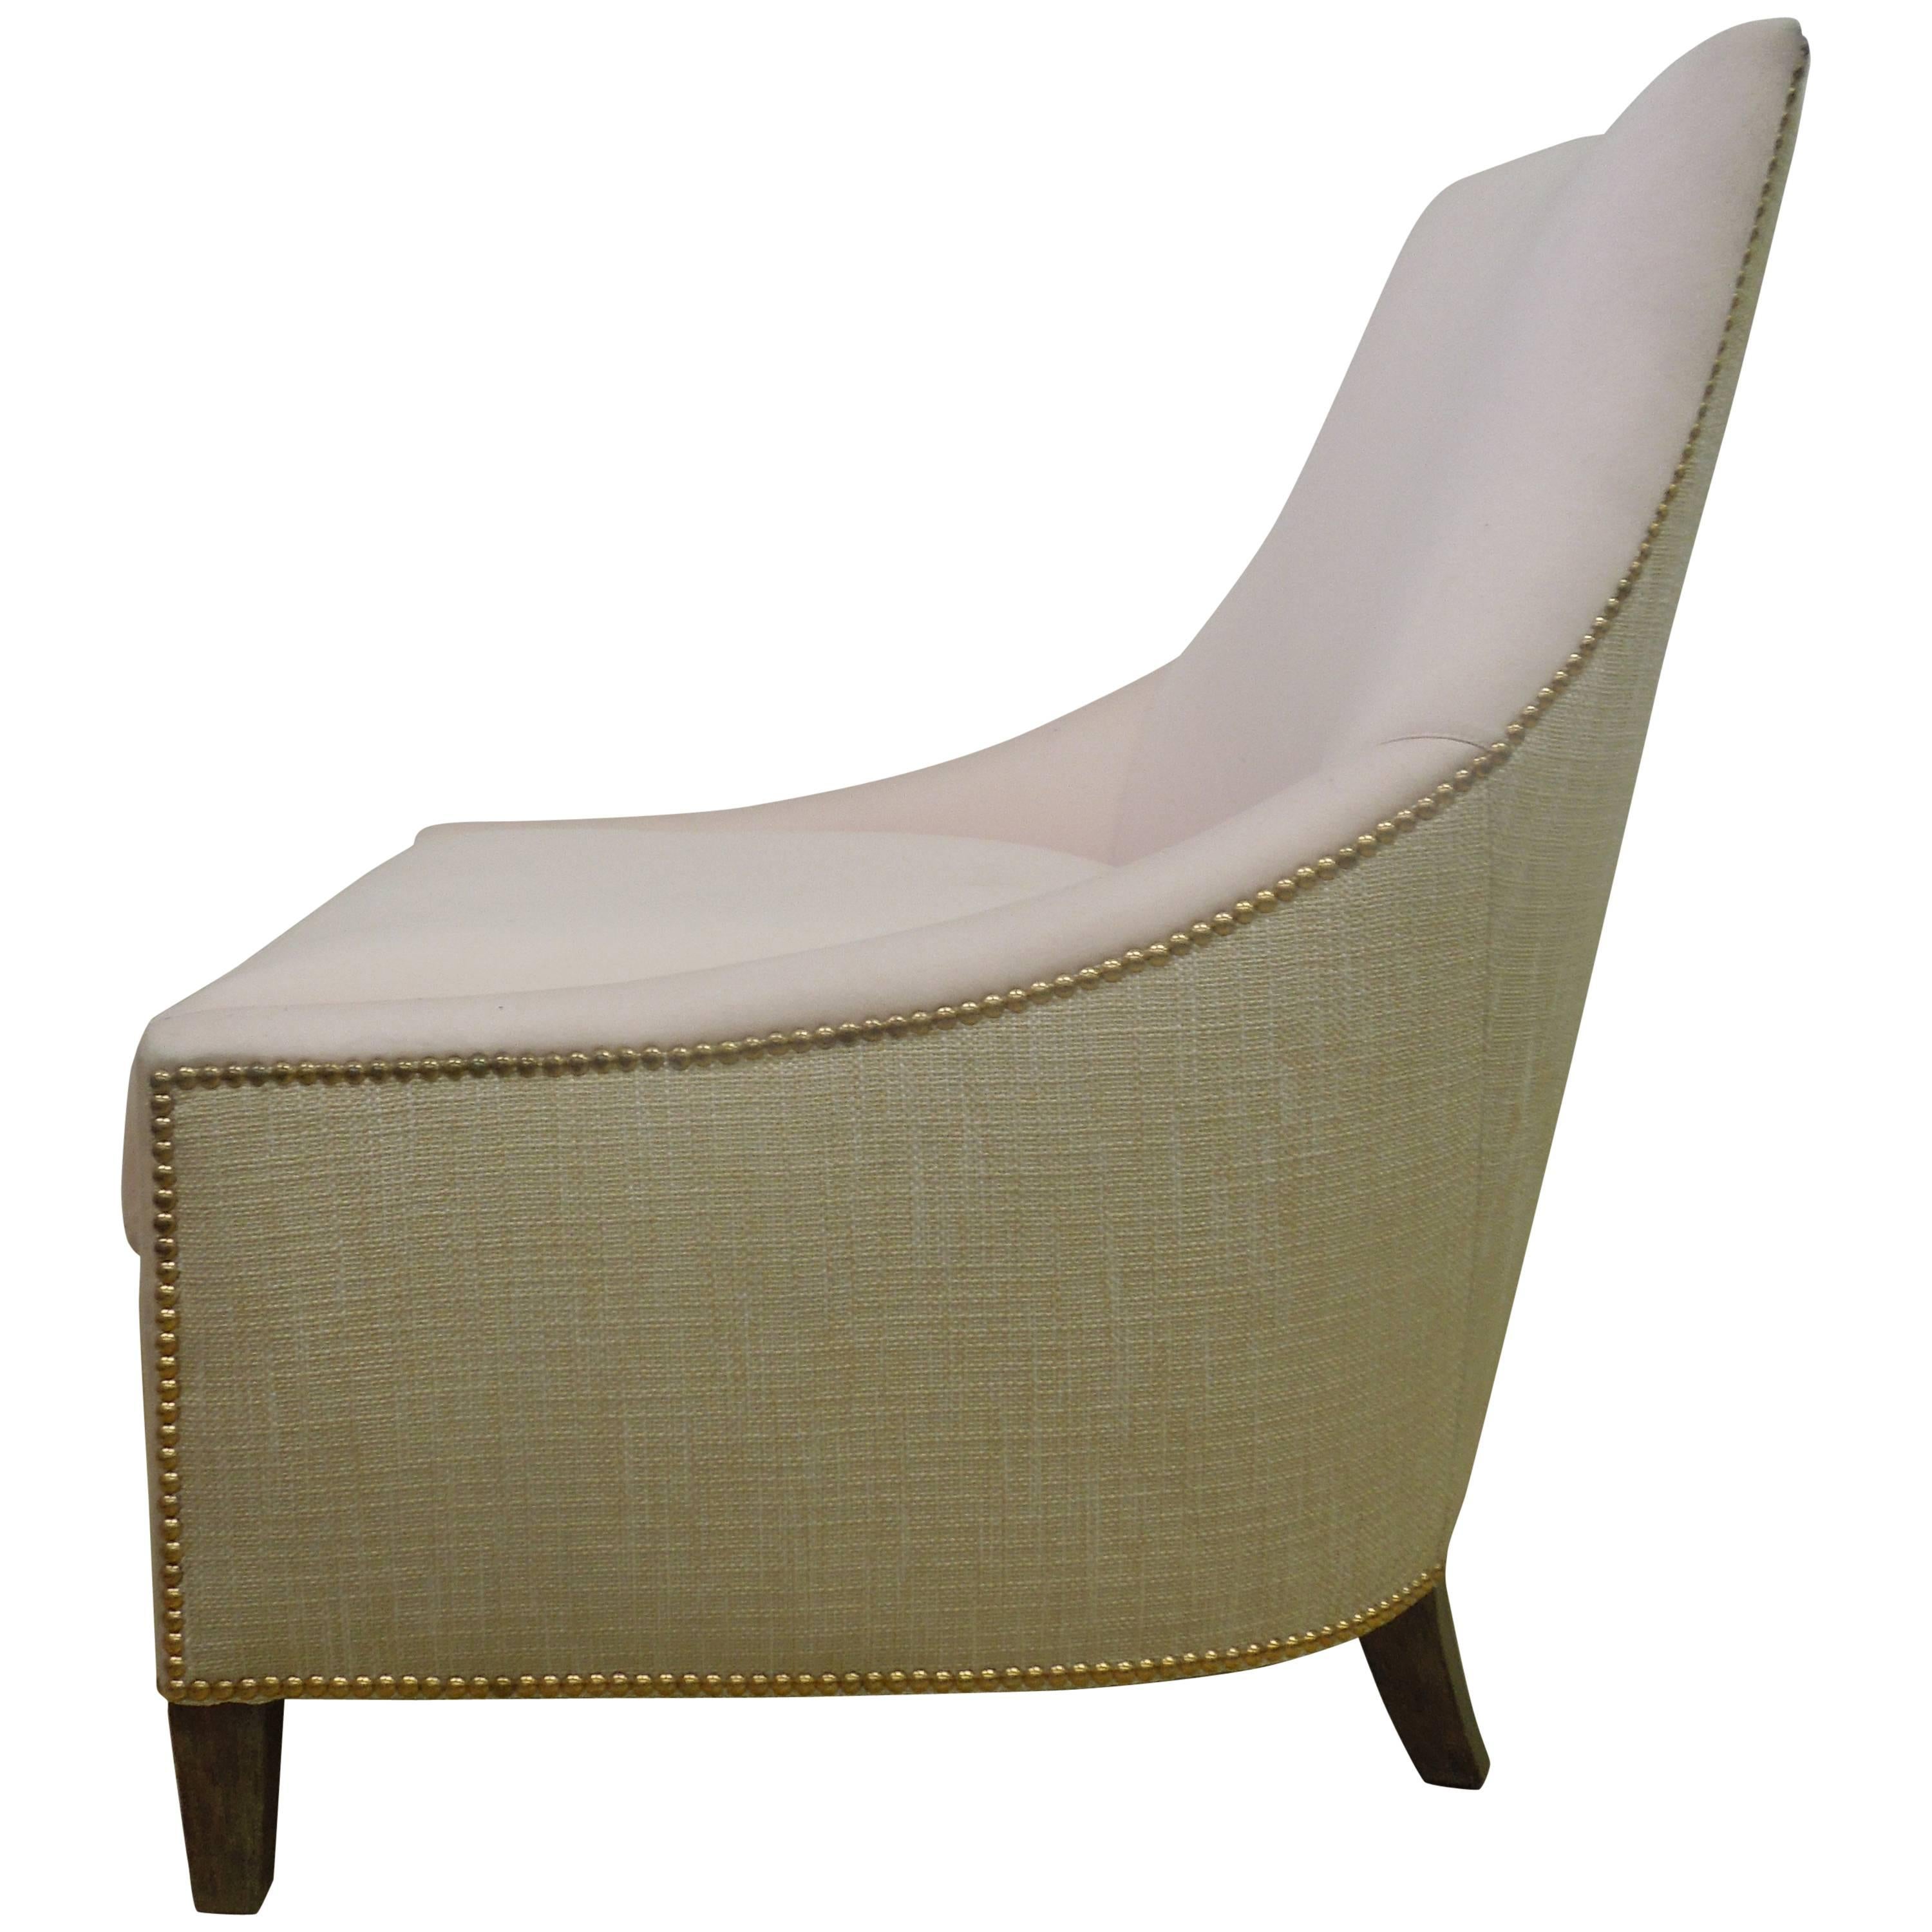 A custom-made chair on tan linen and pink wool blend fabric. Exterior is all tan linen. Interior all pink. Beautiful brass nailhead trim on back. Grey or tan wood legs. Handcrafted in Los Angeles from upscale maker. Came with matching 